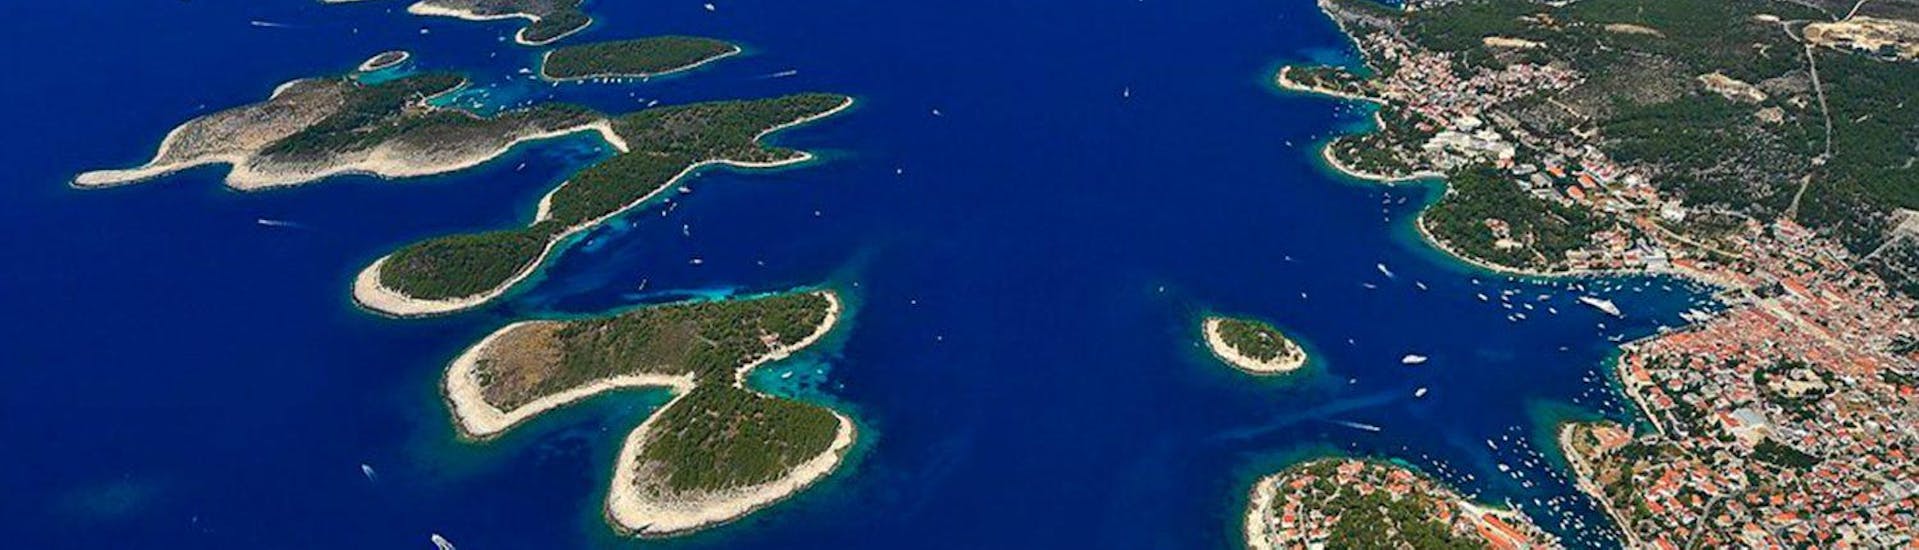 Private Boat Trip to Pakleni Islands &amp; Red Rocks from Hvar  with HvarCruise - Hero image